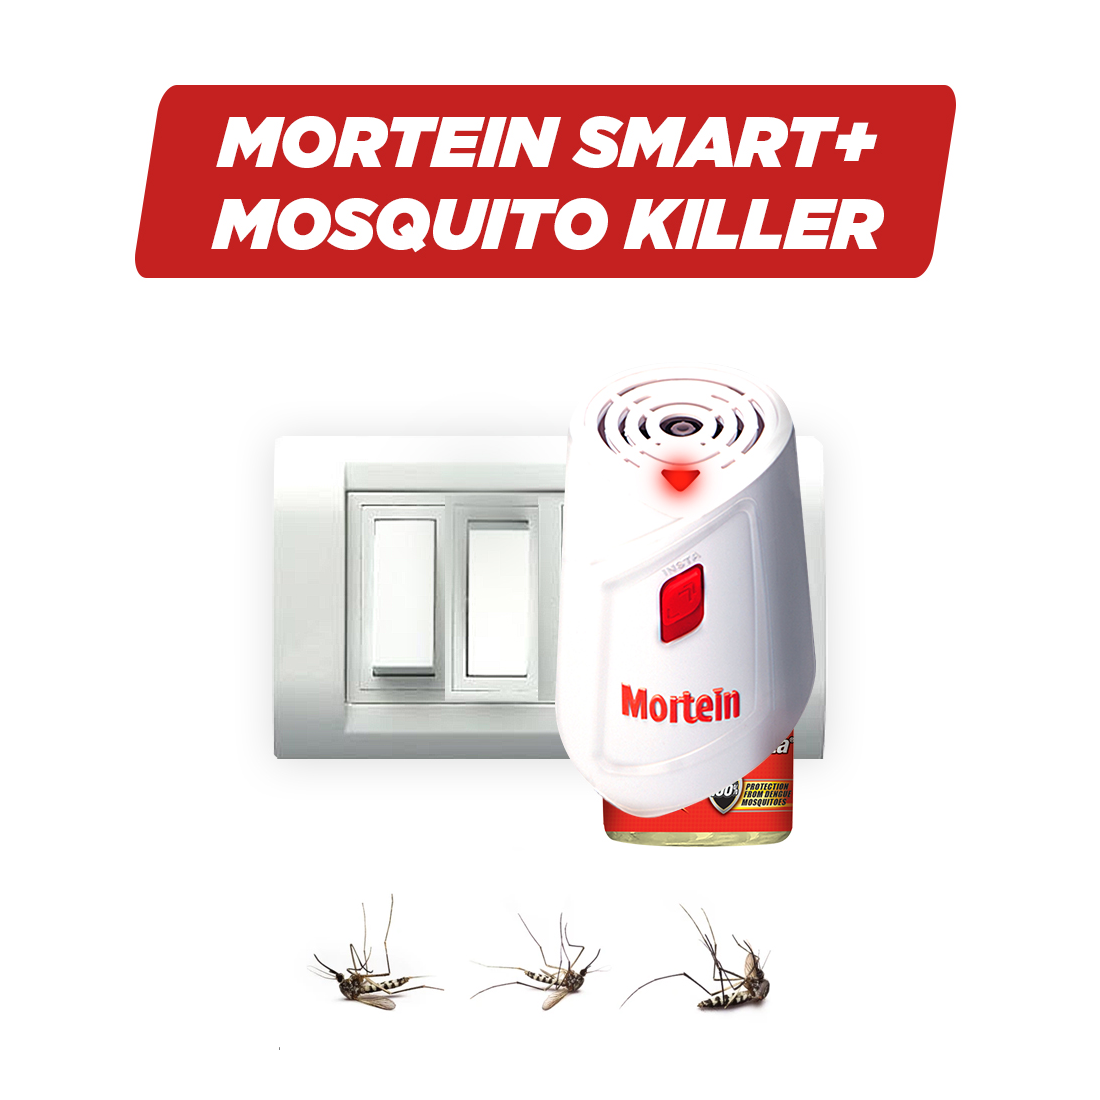 Mortein Liquid vaporizer insecticide Machine and Refill, 45ML